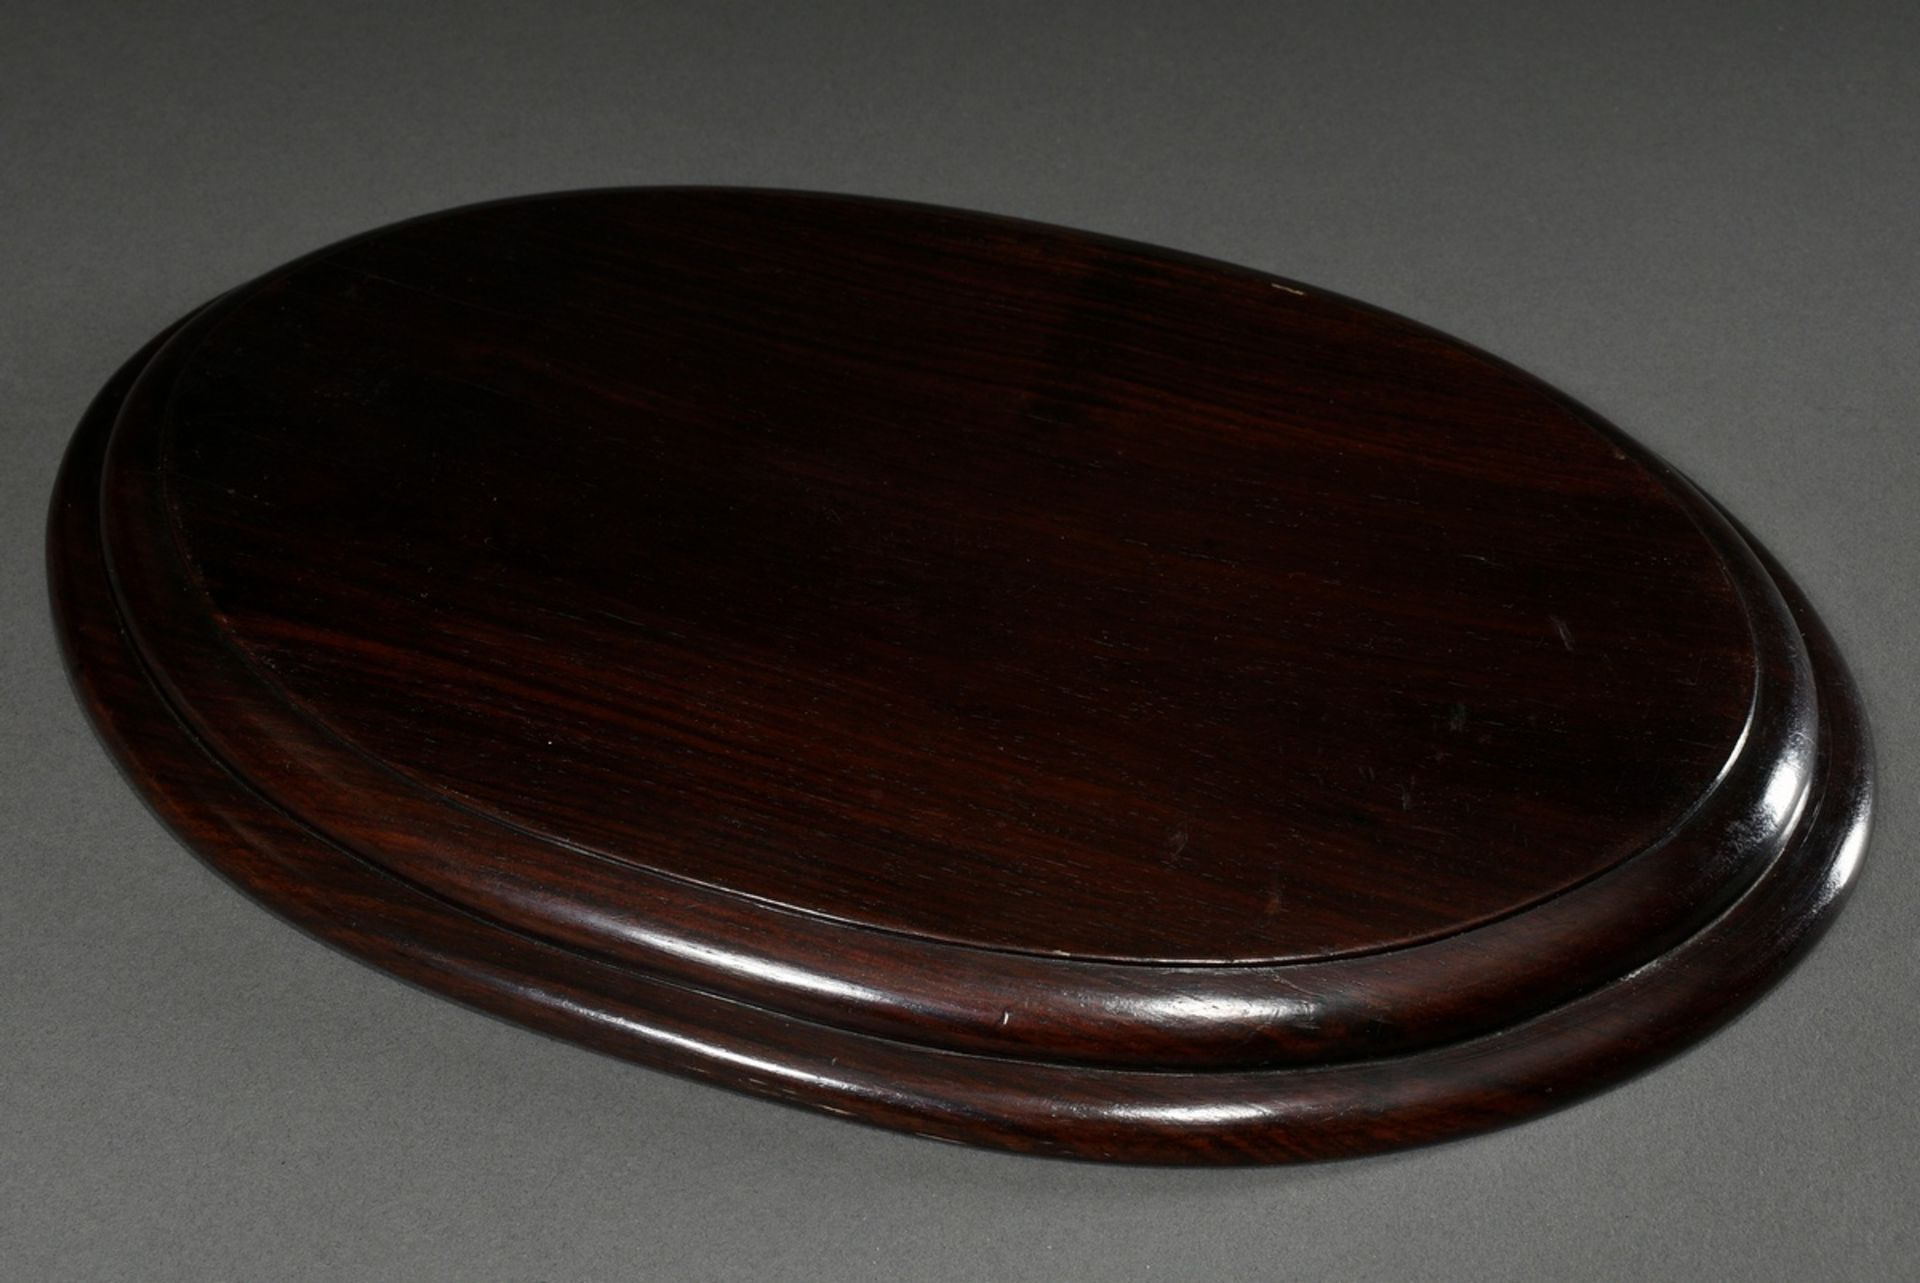 Oval blackwood tray with four silver relief decorations "dragons" on the rim, China circa 1900/1920 - Image 3 of 5